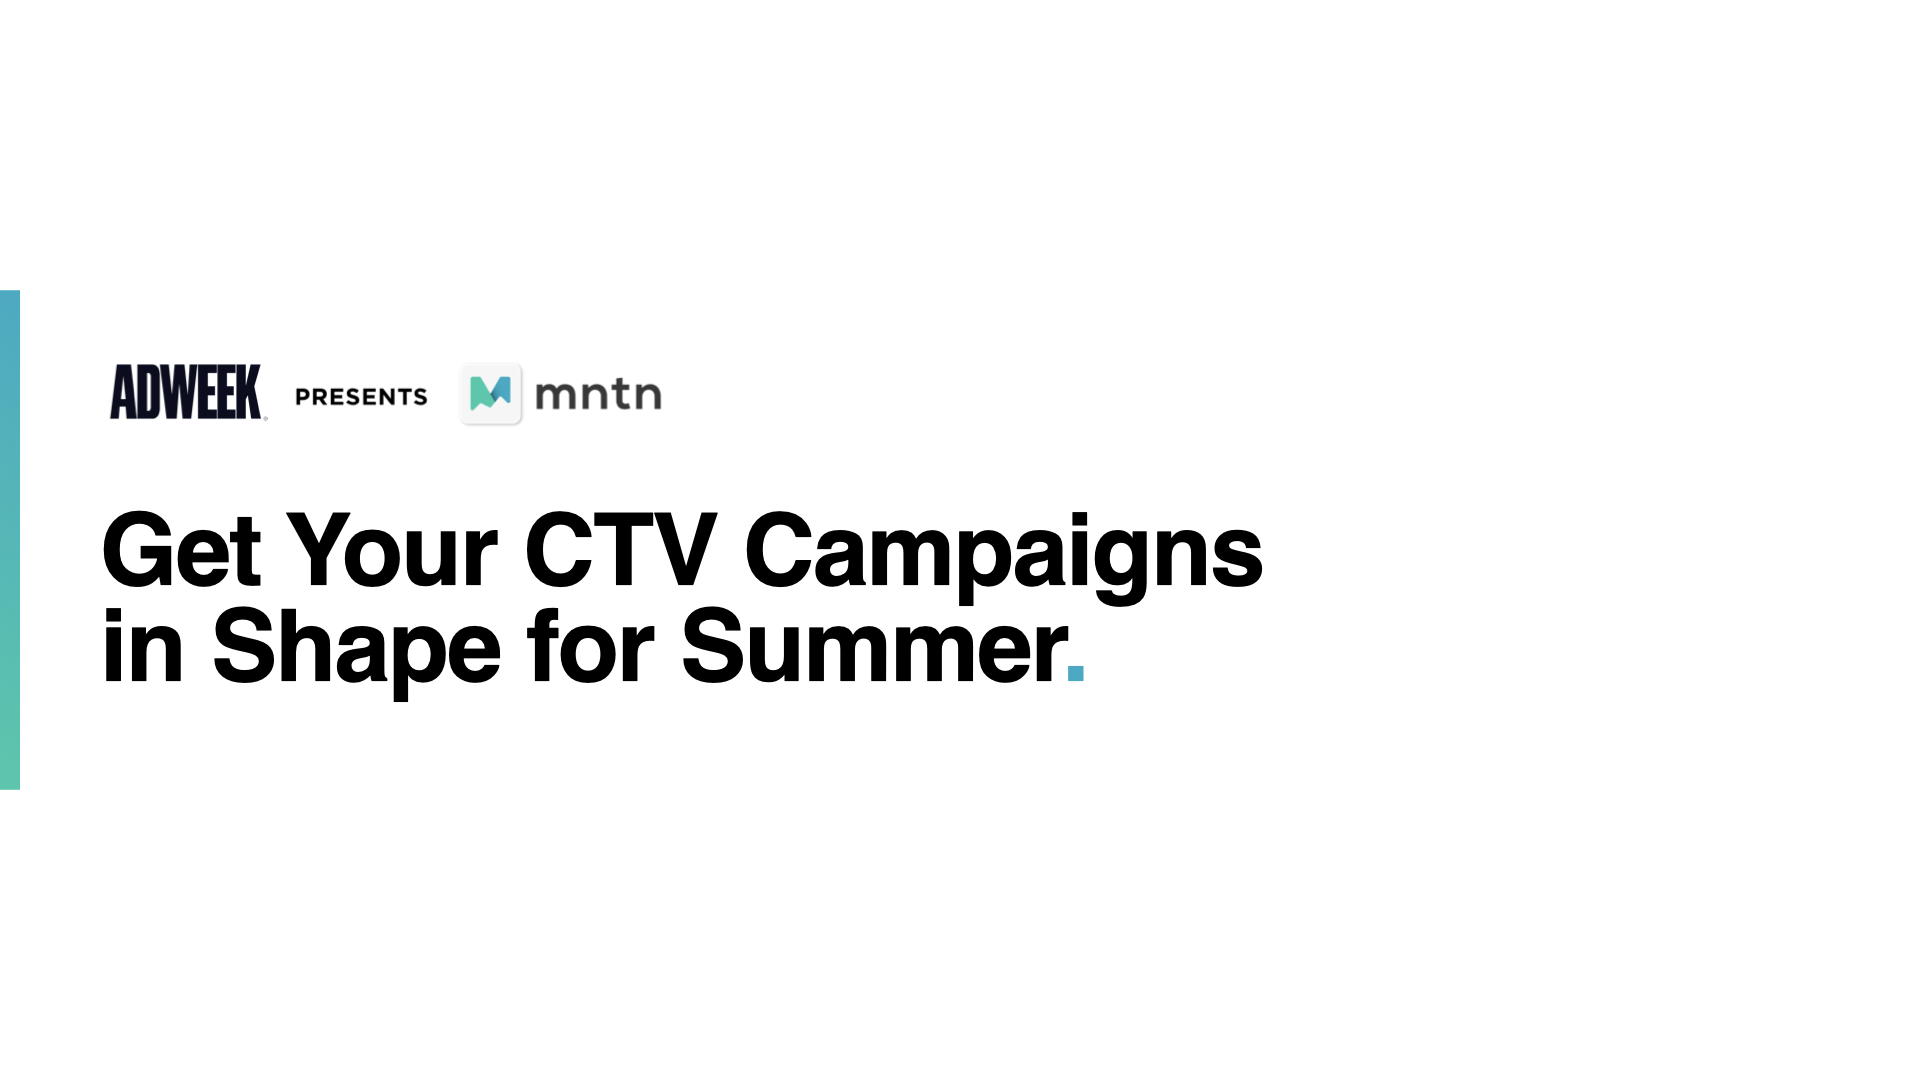 Get Your CTV Campaigns in Shape for Summer: Time to Rethink Your Strategies